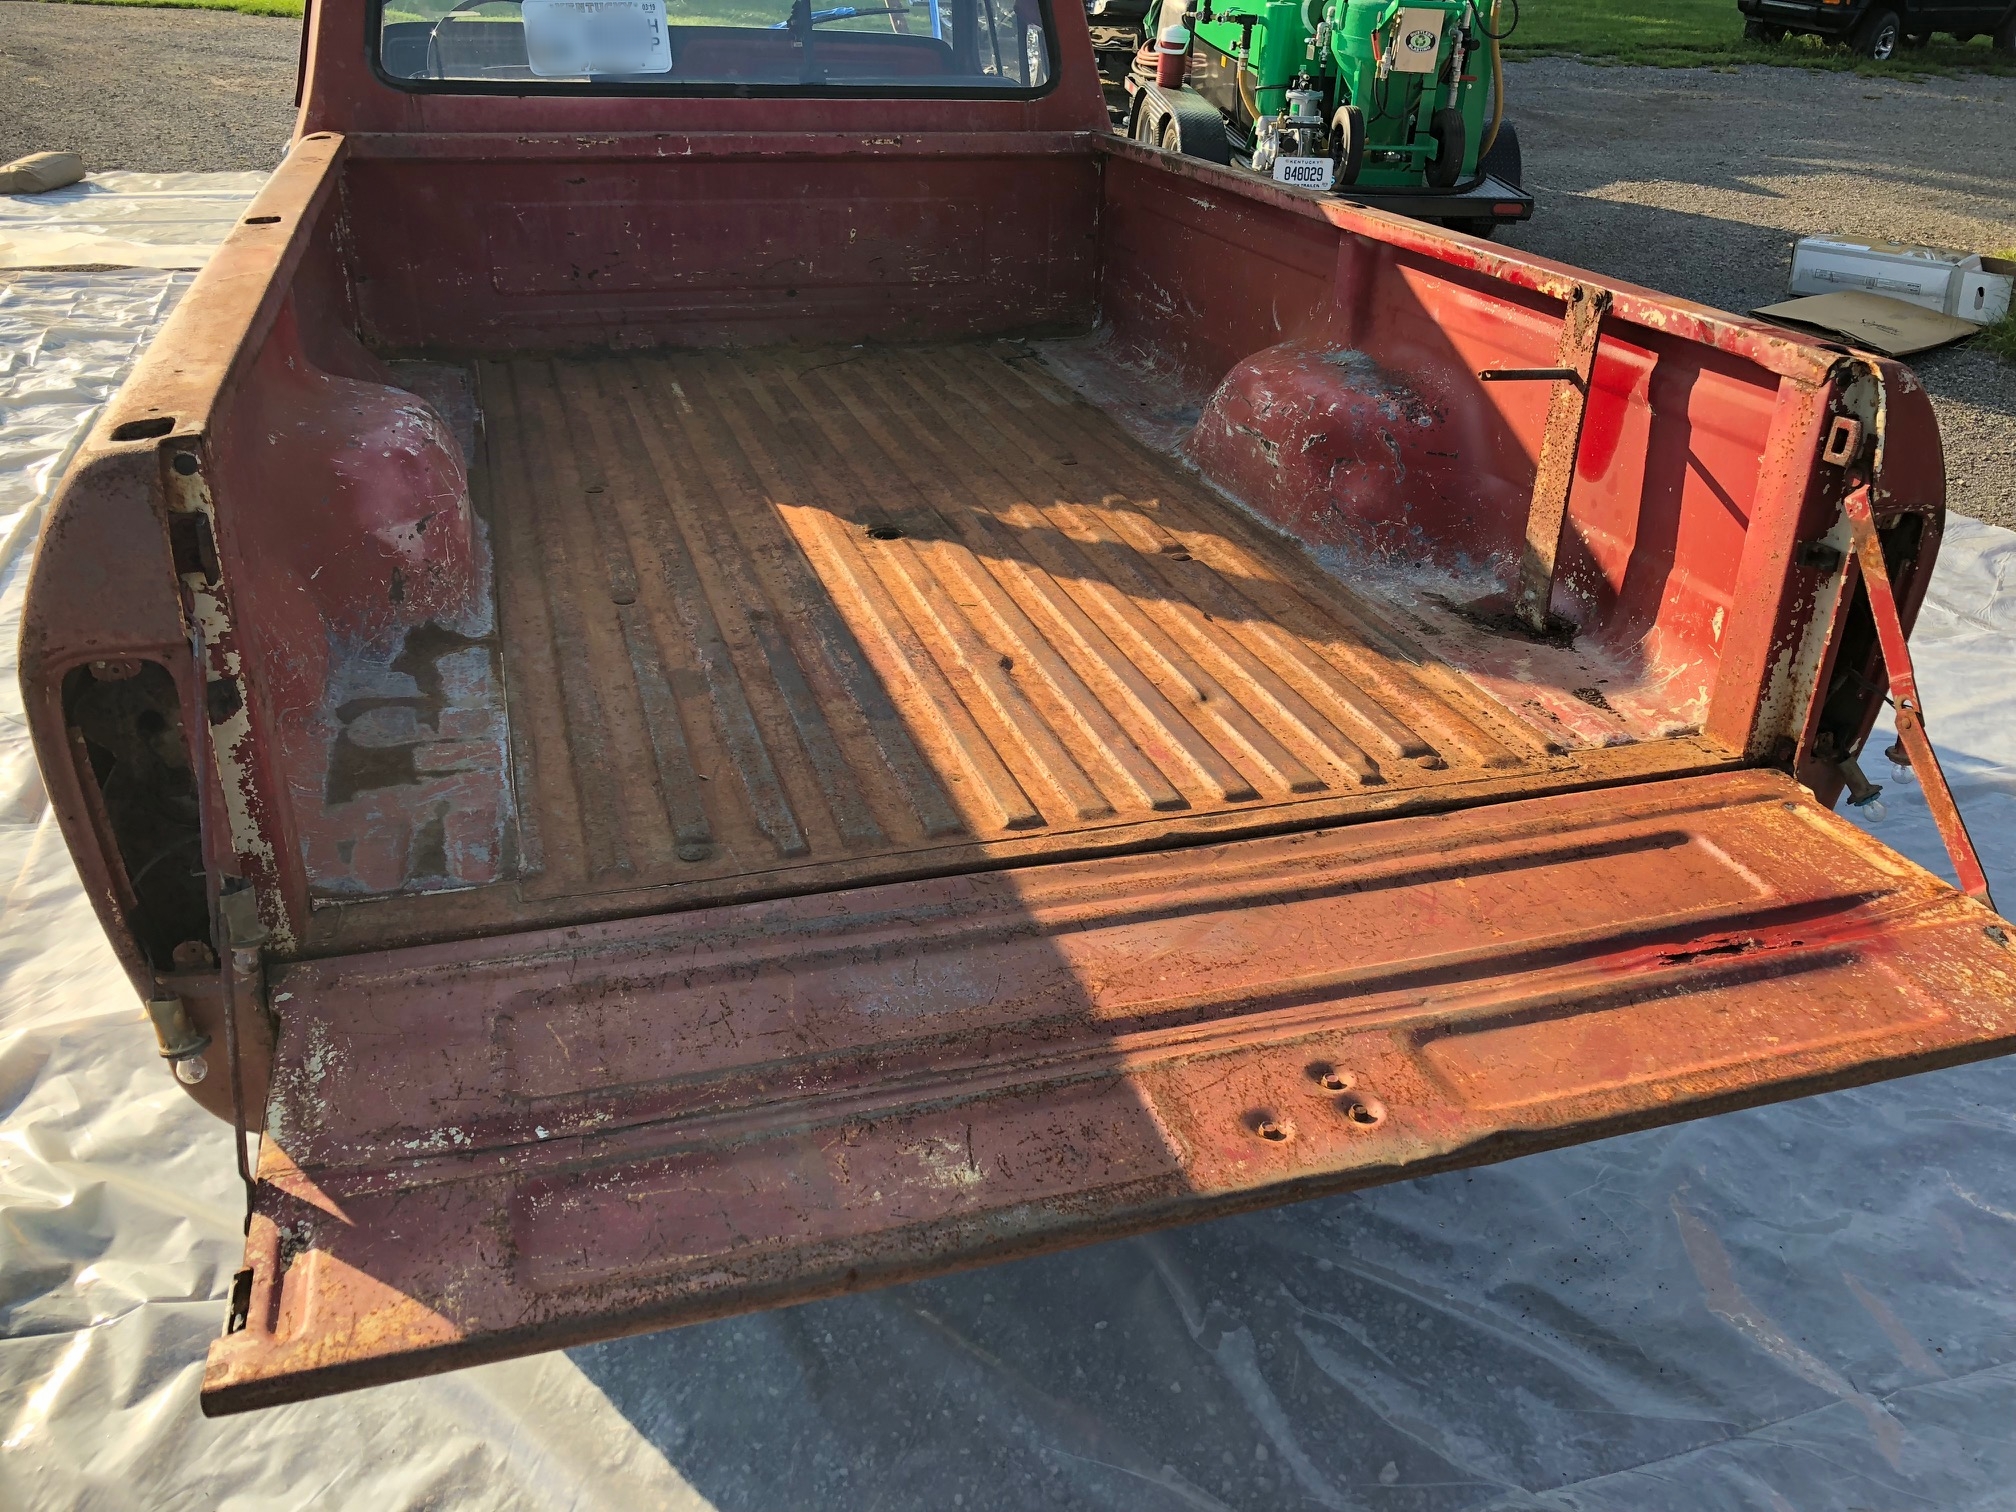 70's Ford Pickup Truck Bed Before